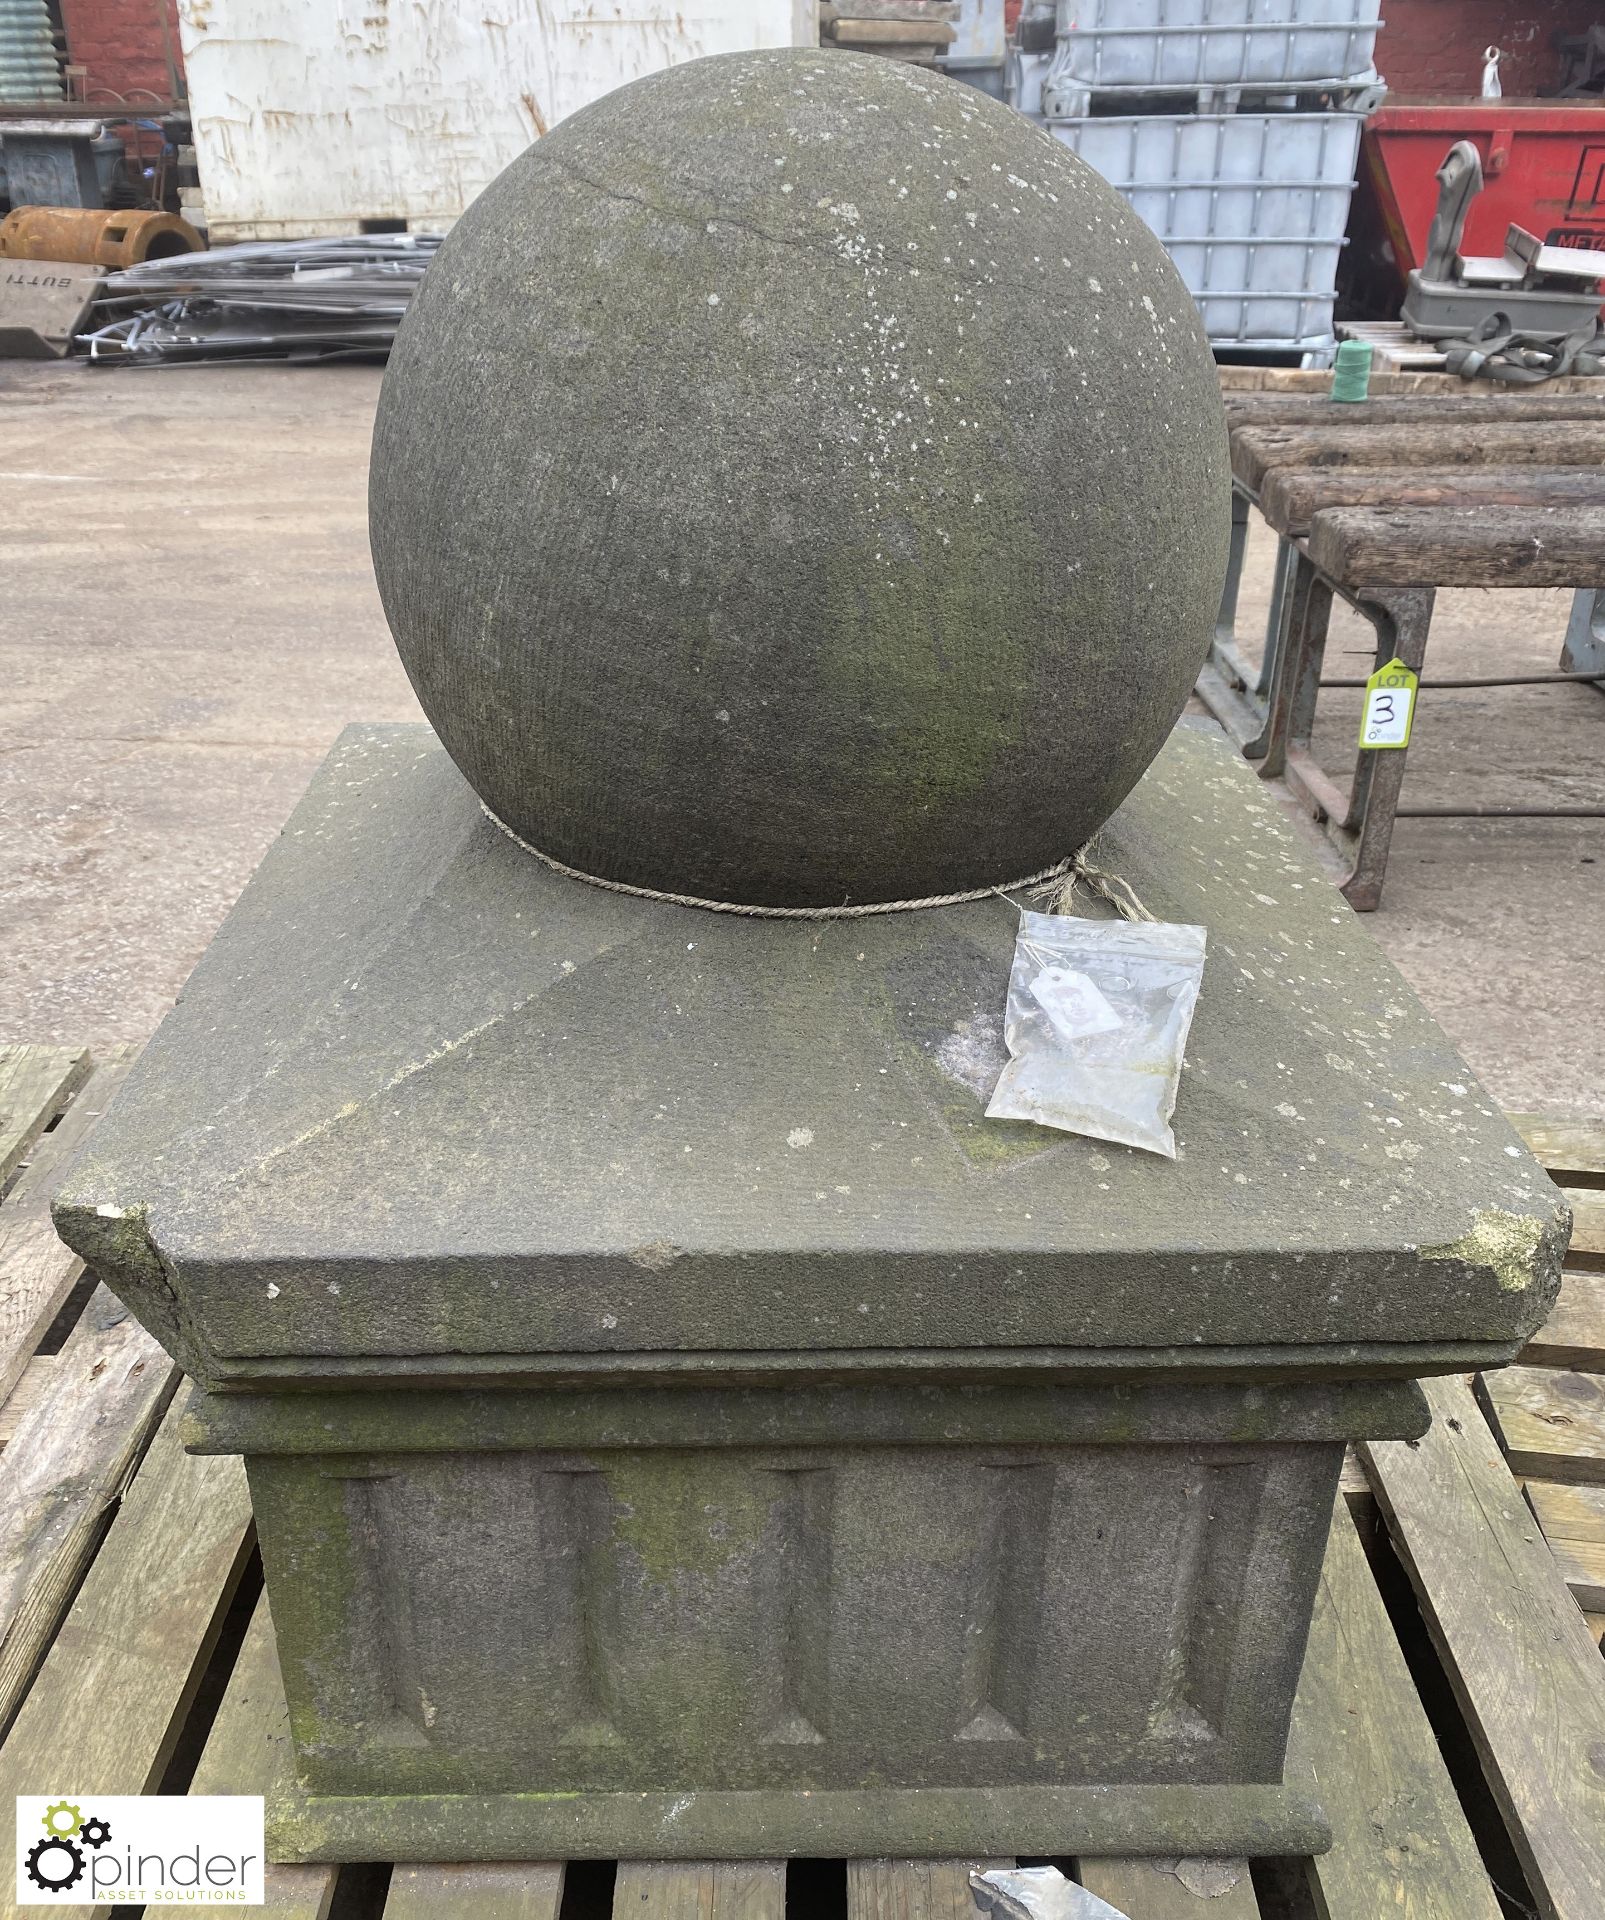 Set 3 Yorkshire stone Gate Post Pier Caps, with ball top, base 600mm x 600mm, 900mm tall - Image 8 of 11